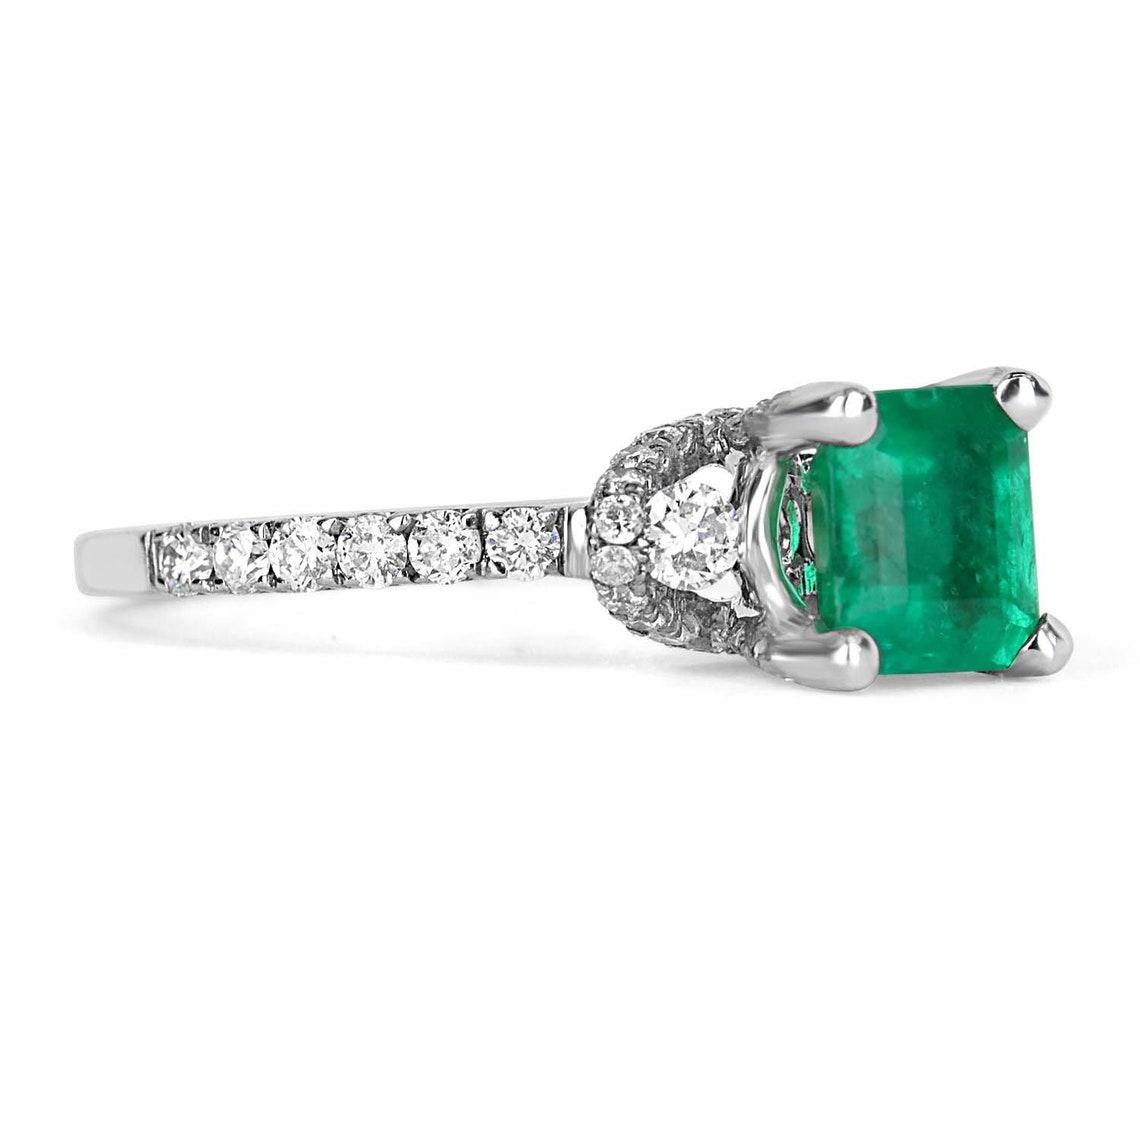 Displayed is a natural AAA+ Asscher cut Colombian emerald and diamond accent engagement ring. The center gem is a fine quality, earth mined, emerald filled with life and brilliance! Among the emeralds, impressive qualities are its vibrant color and